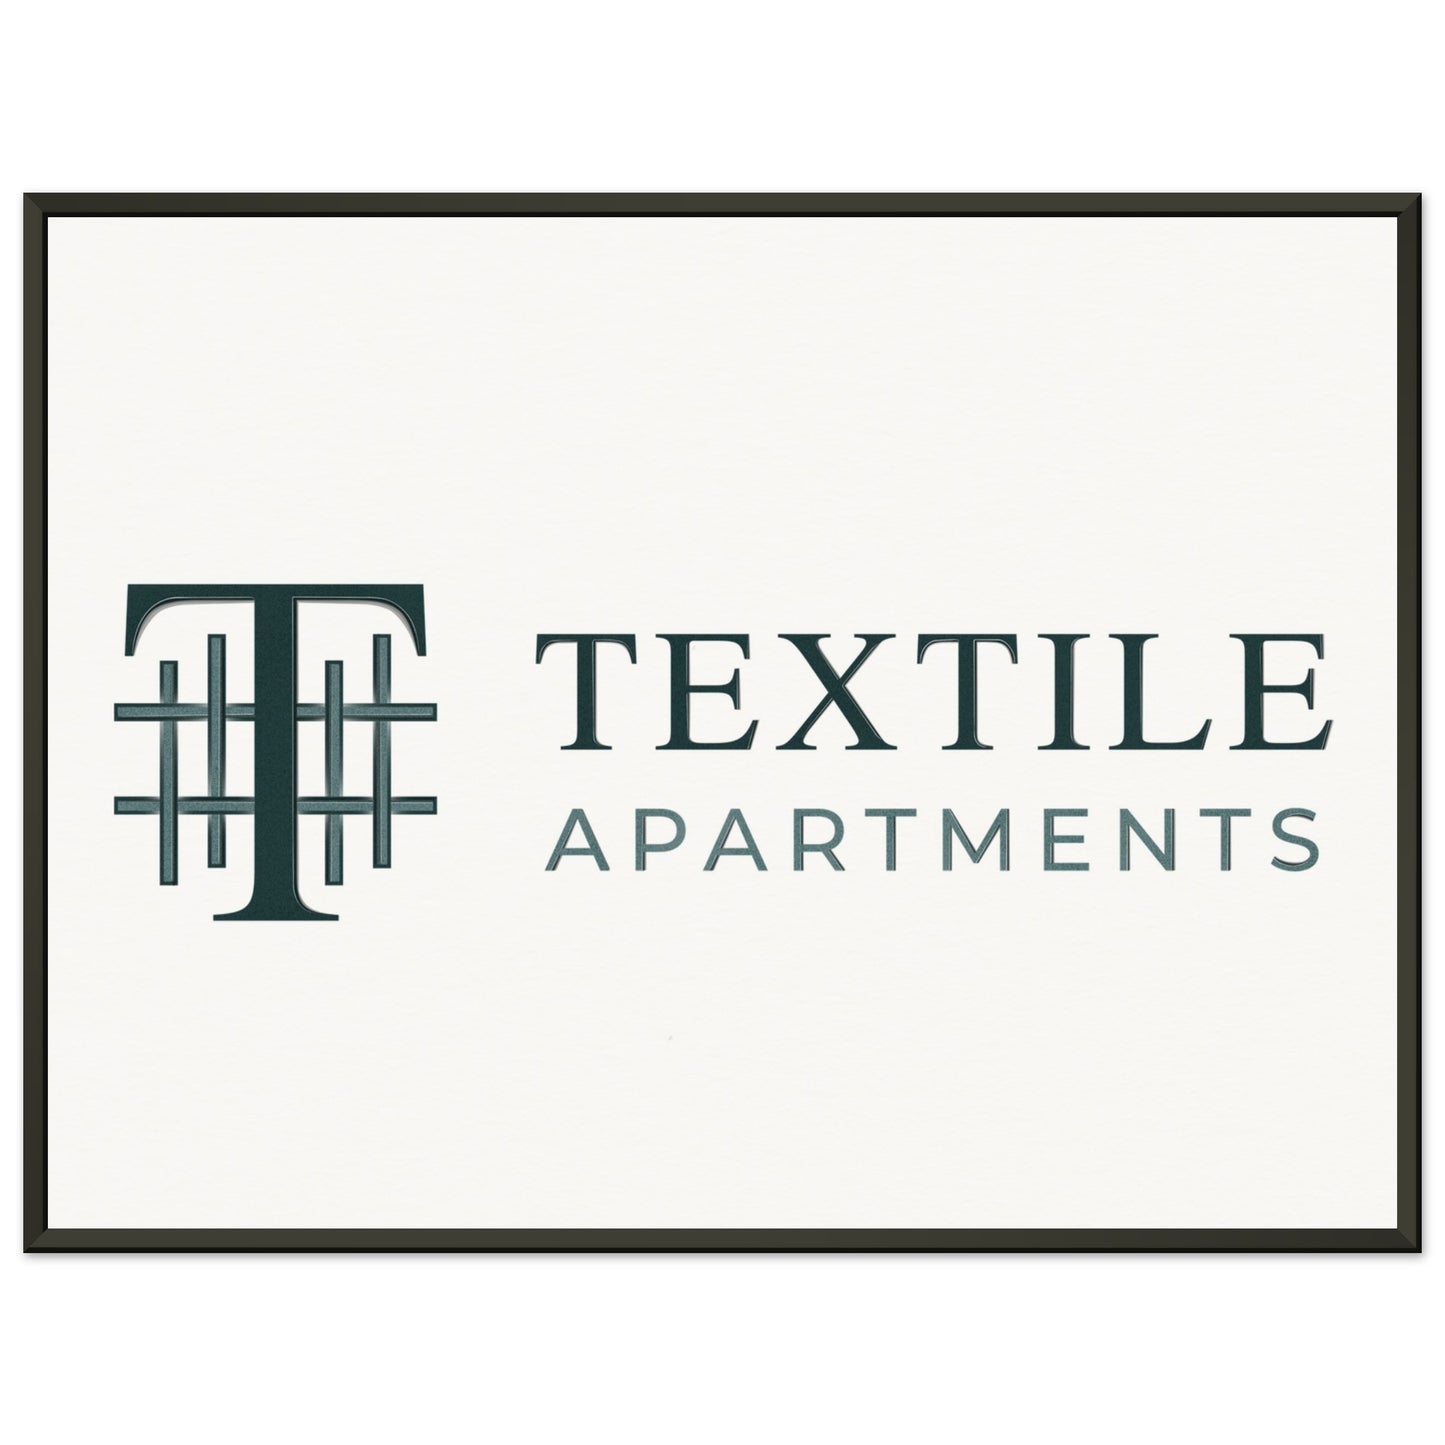 Textile Apartments - Museum-Quality Matte Paper Metal Framed Poster